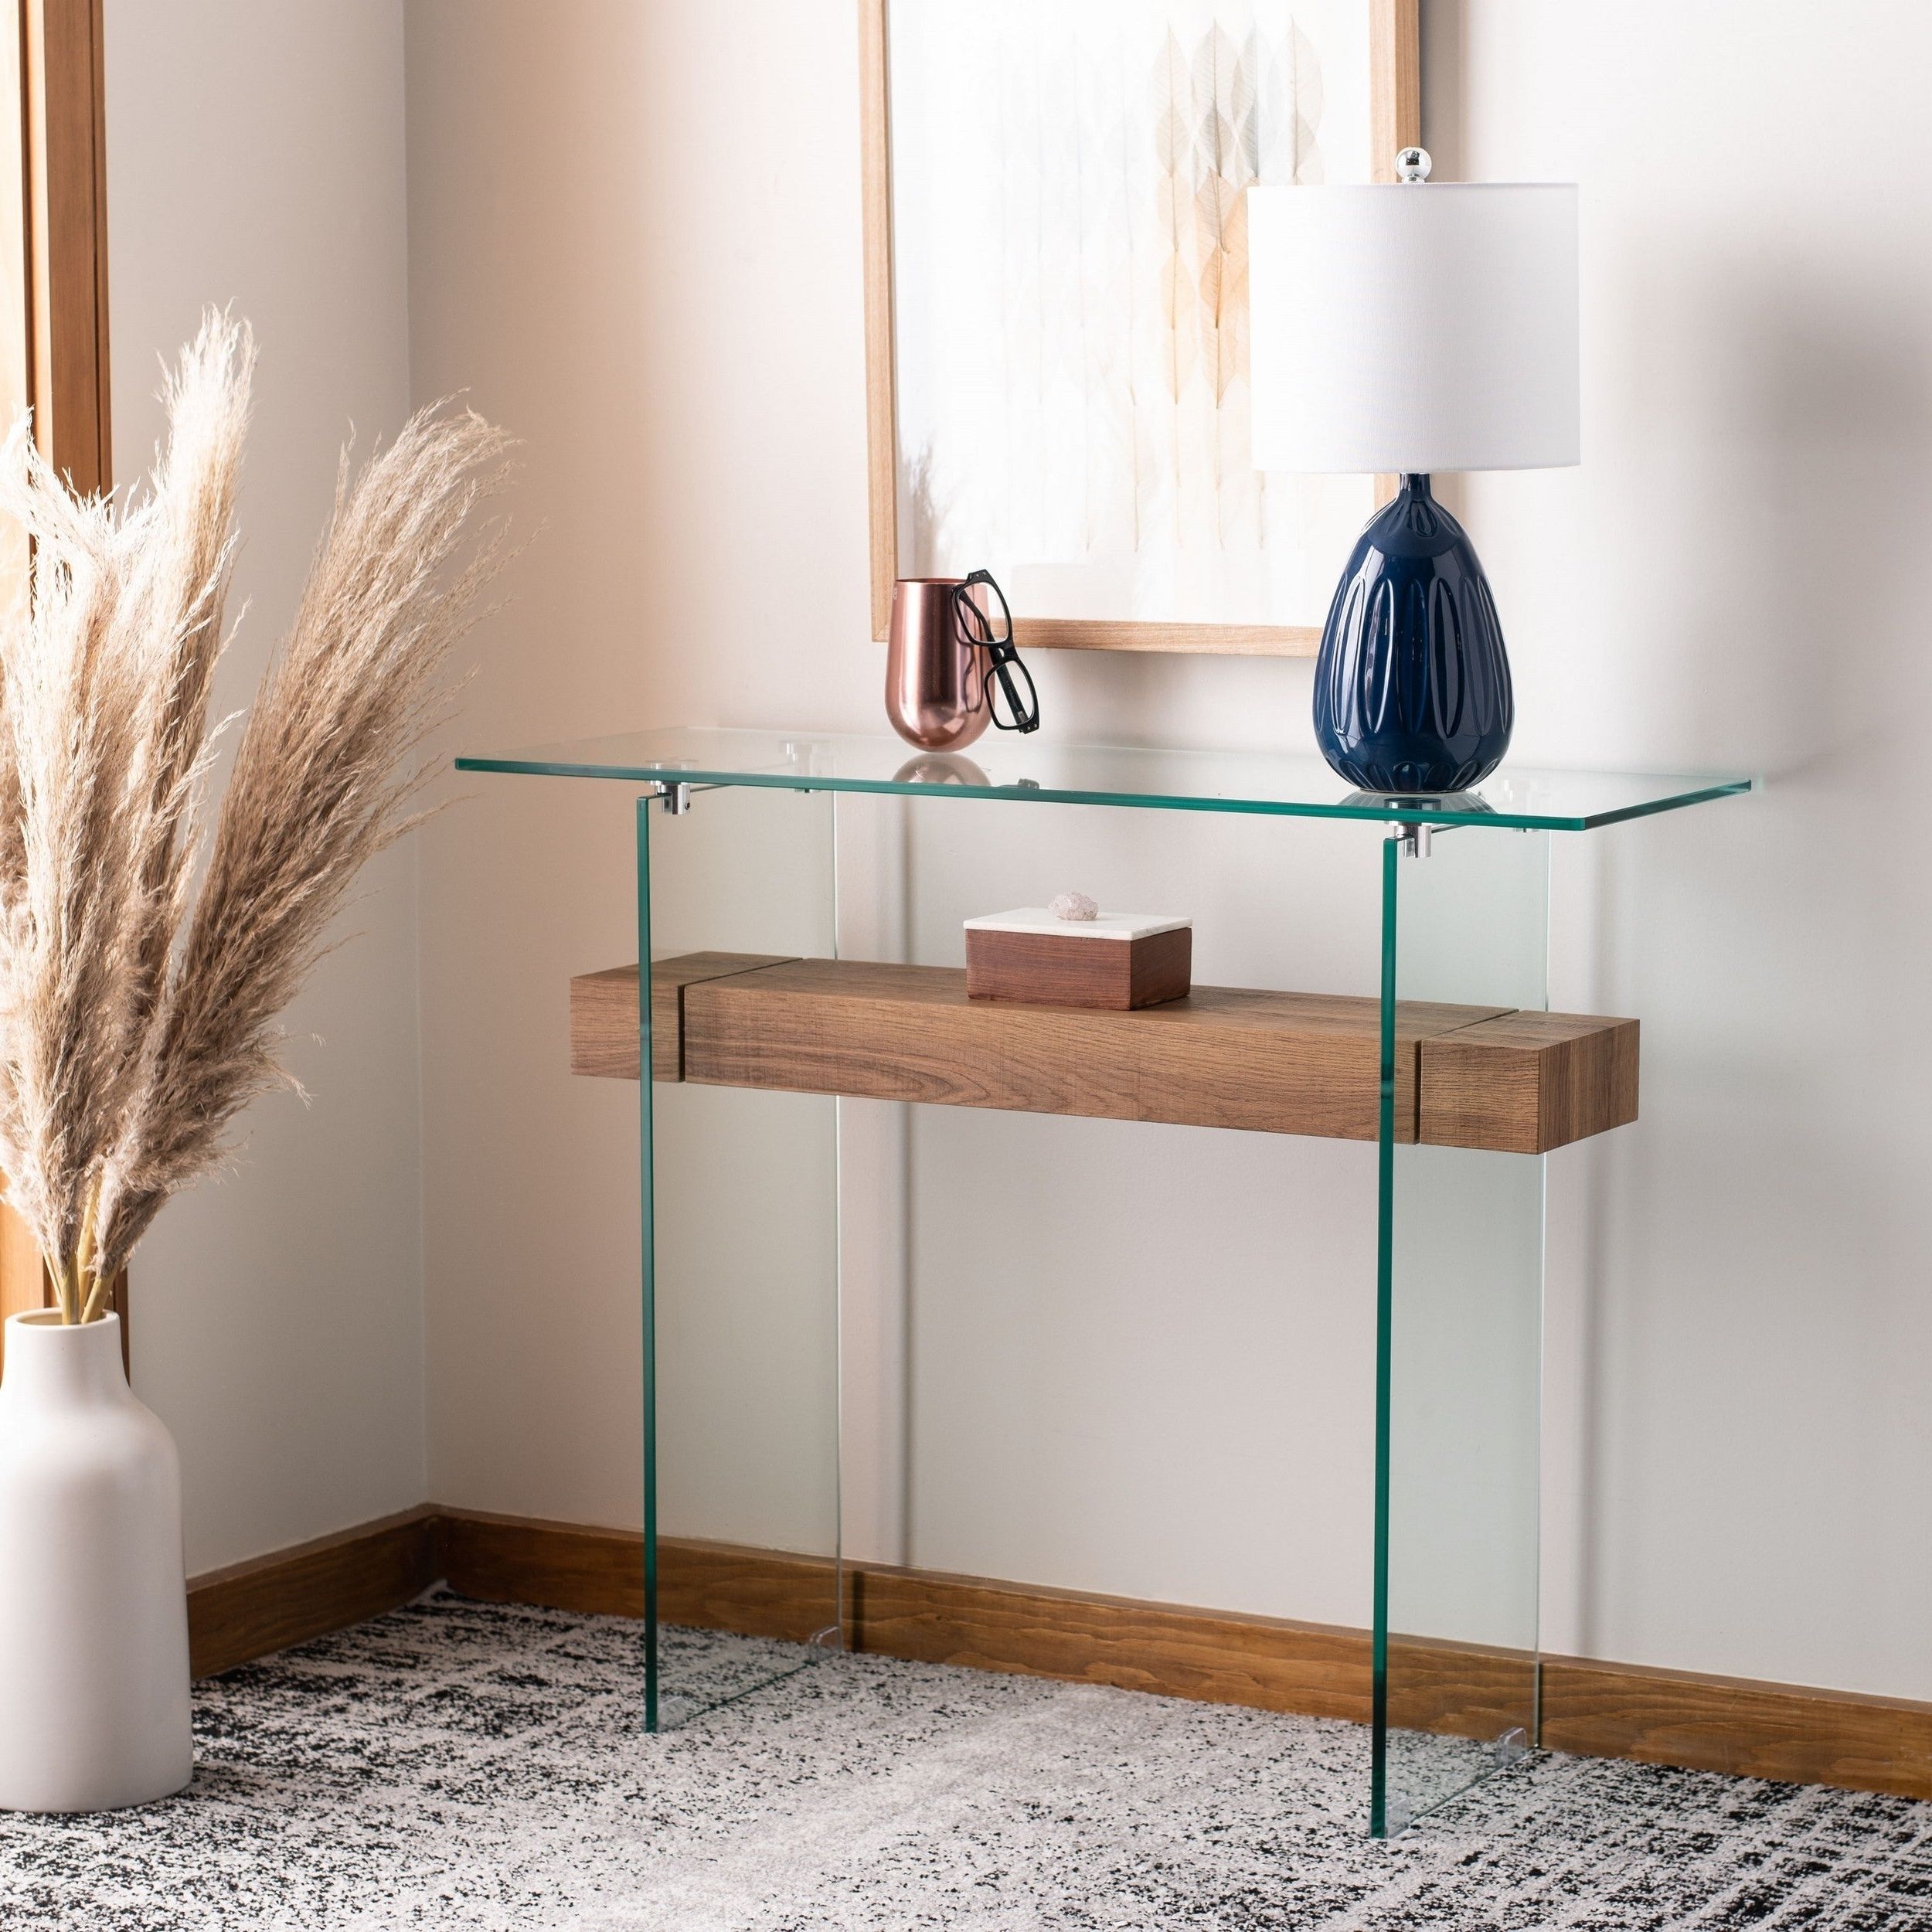 Safavieh Kayley Rectangular Modern Glass Console Table With Most Recent Modern Console Tables (View 9 of 10)